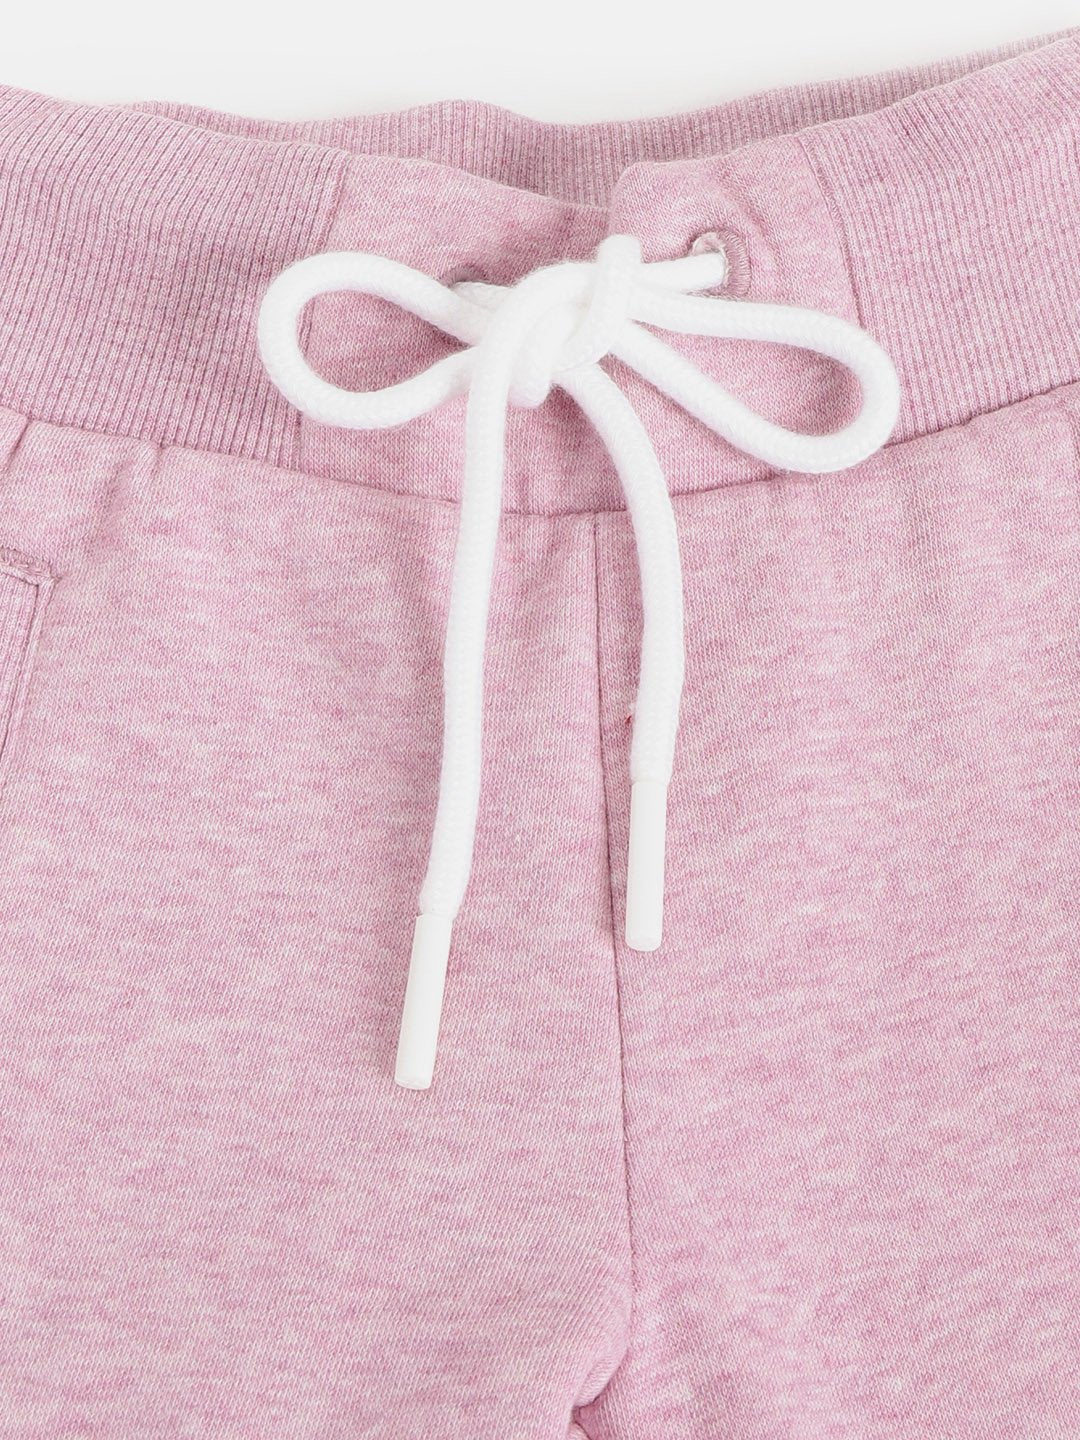 Alcis Girls Pink Solid Straight Fit Knitted Sports Joggers